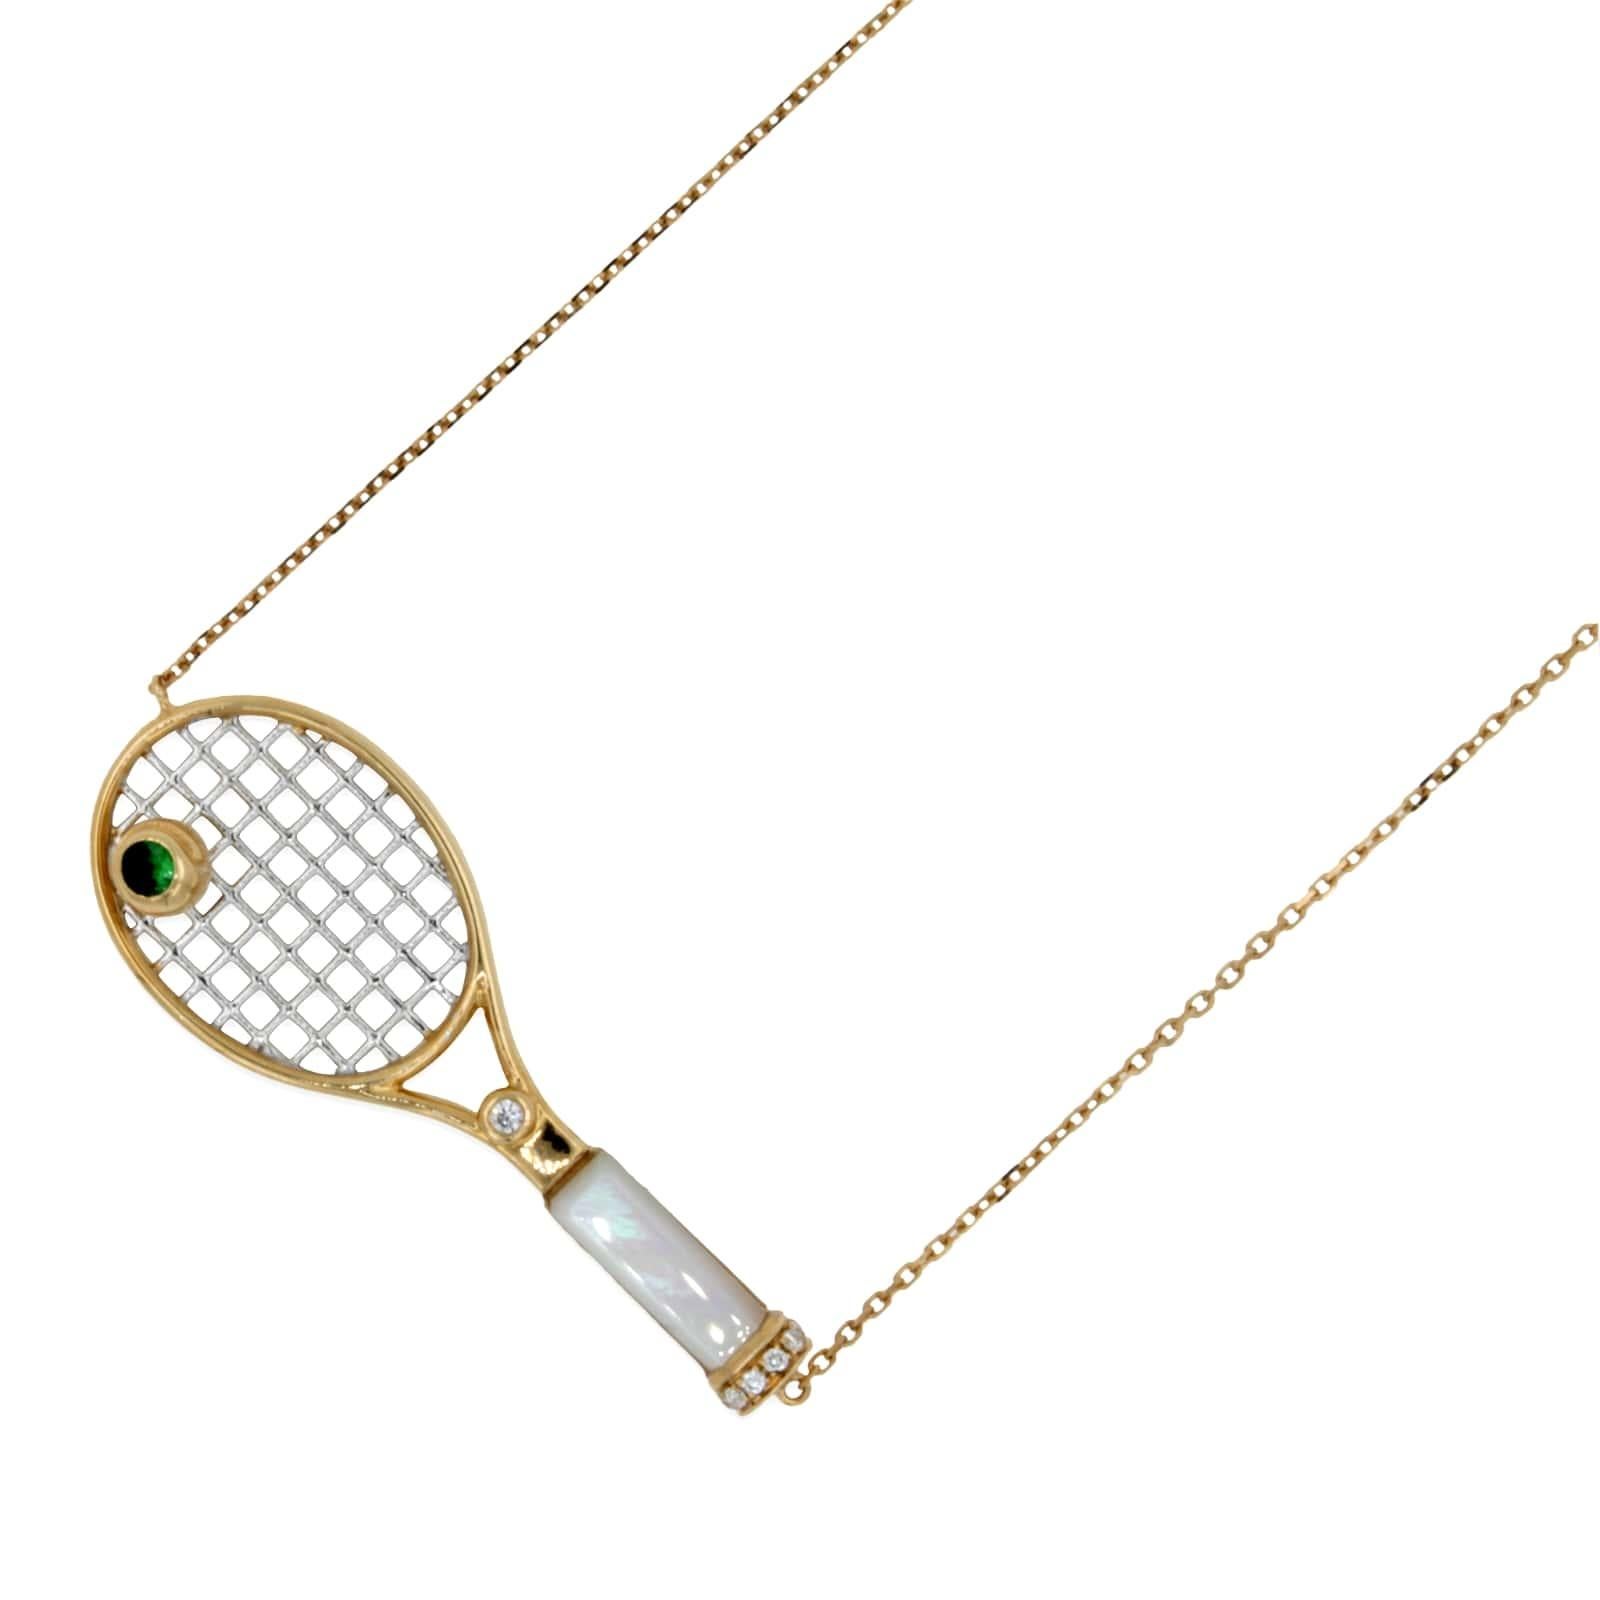 Approximate Ace Racket Length: 1.77” inches / 4.5 centimeters 
Designed & Handmade in Washington, D.C. USA
18K Yellow Gold
White Mother of Pearl Gemstone Handle
Green Emerald Tennis Ball Gemstone
0.25 cts Diamonds
16-18 inches Diamond-Cut Link Cable